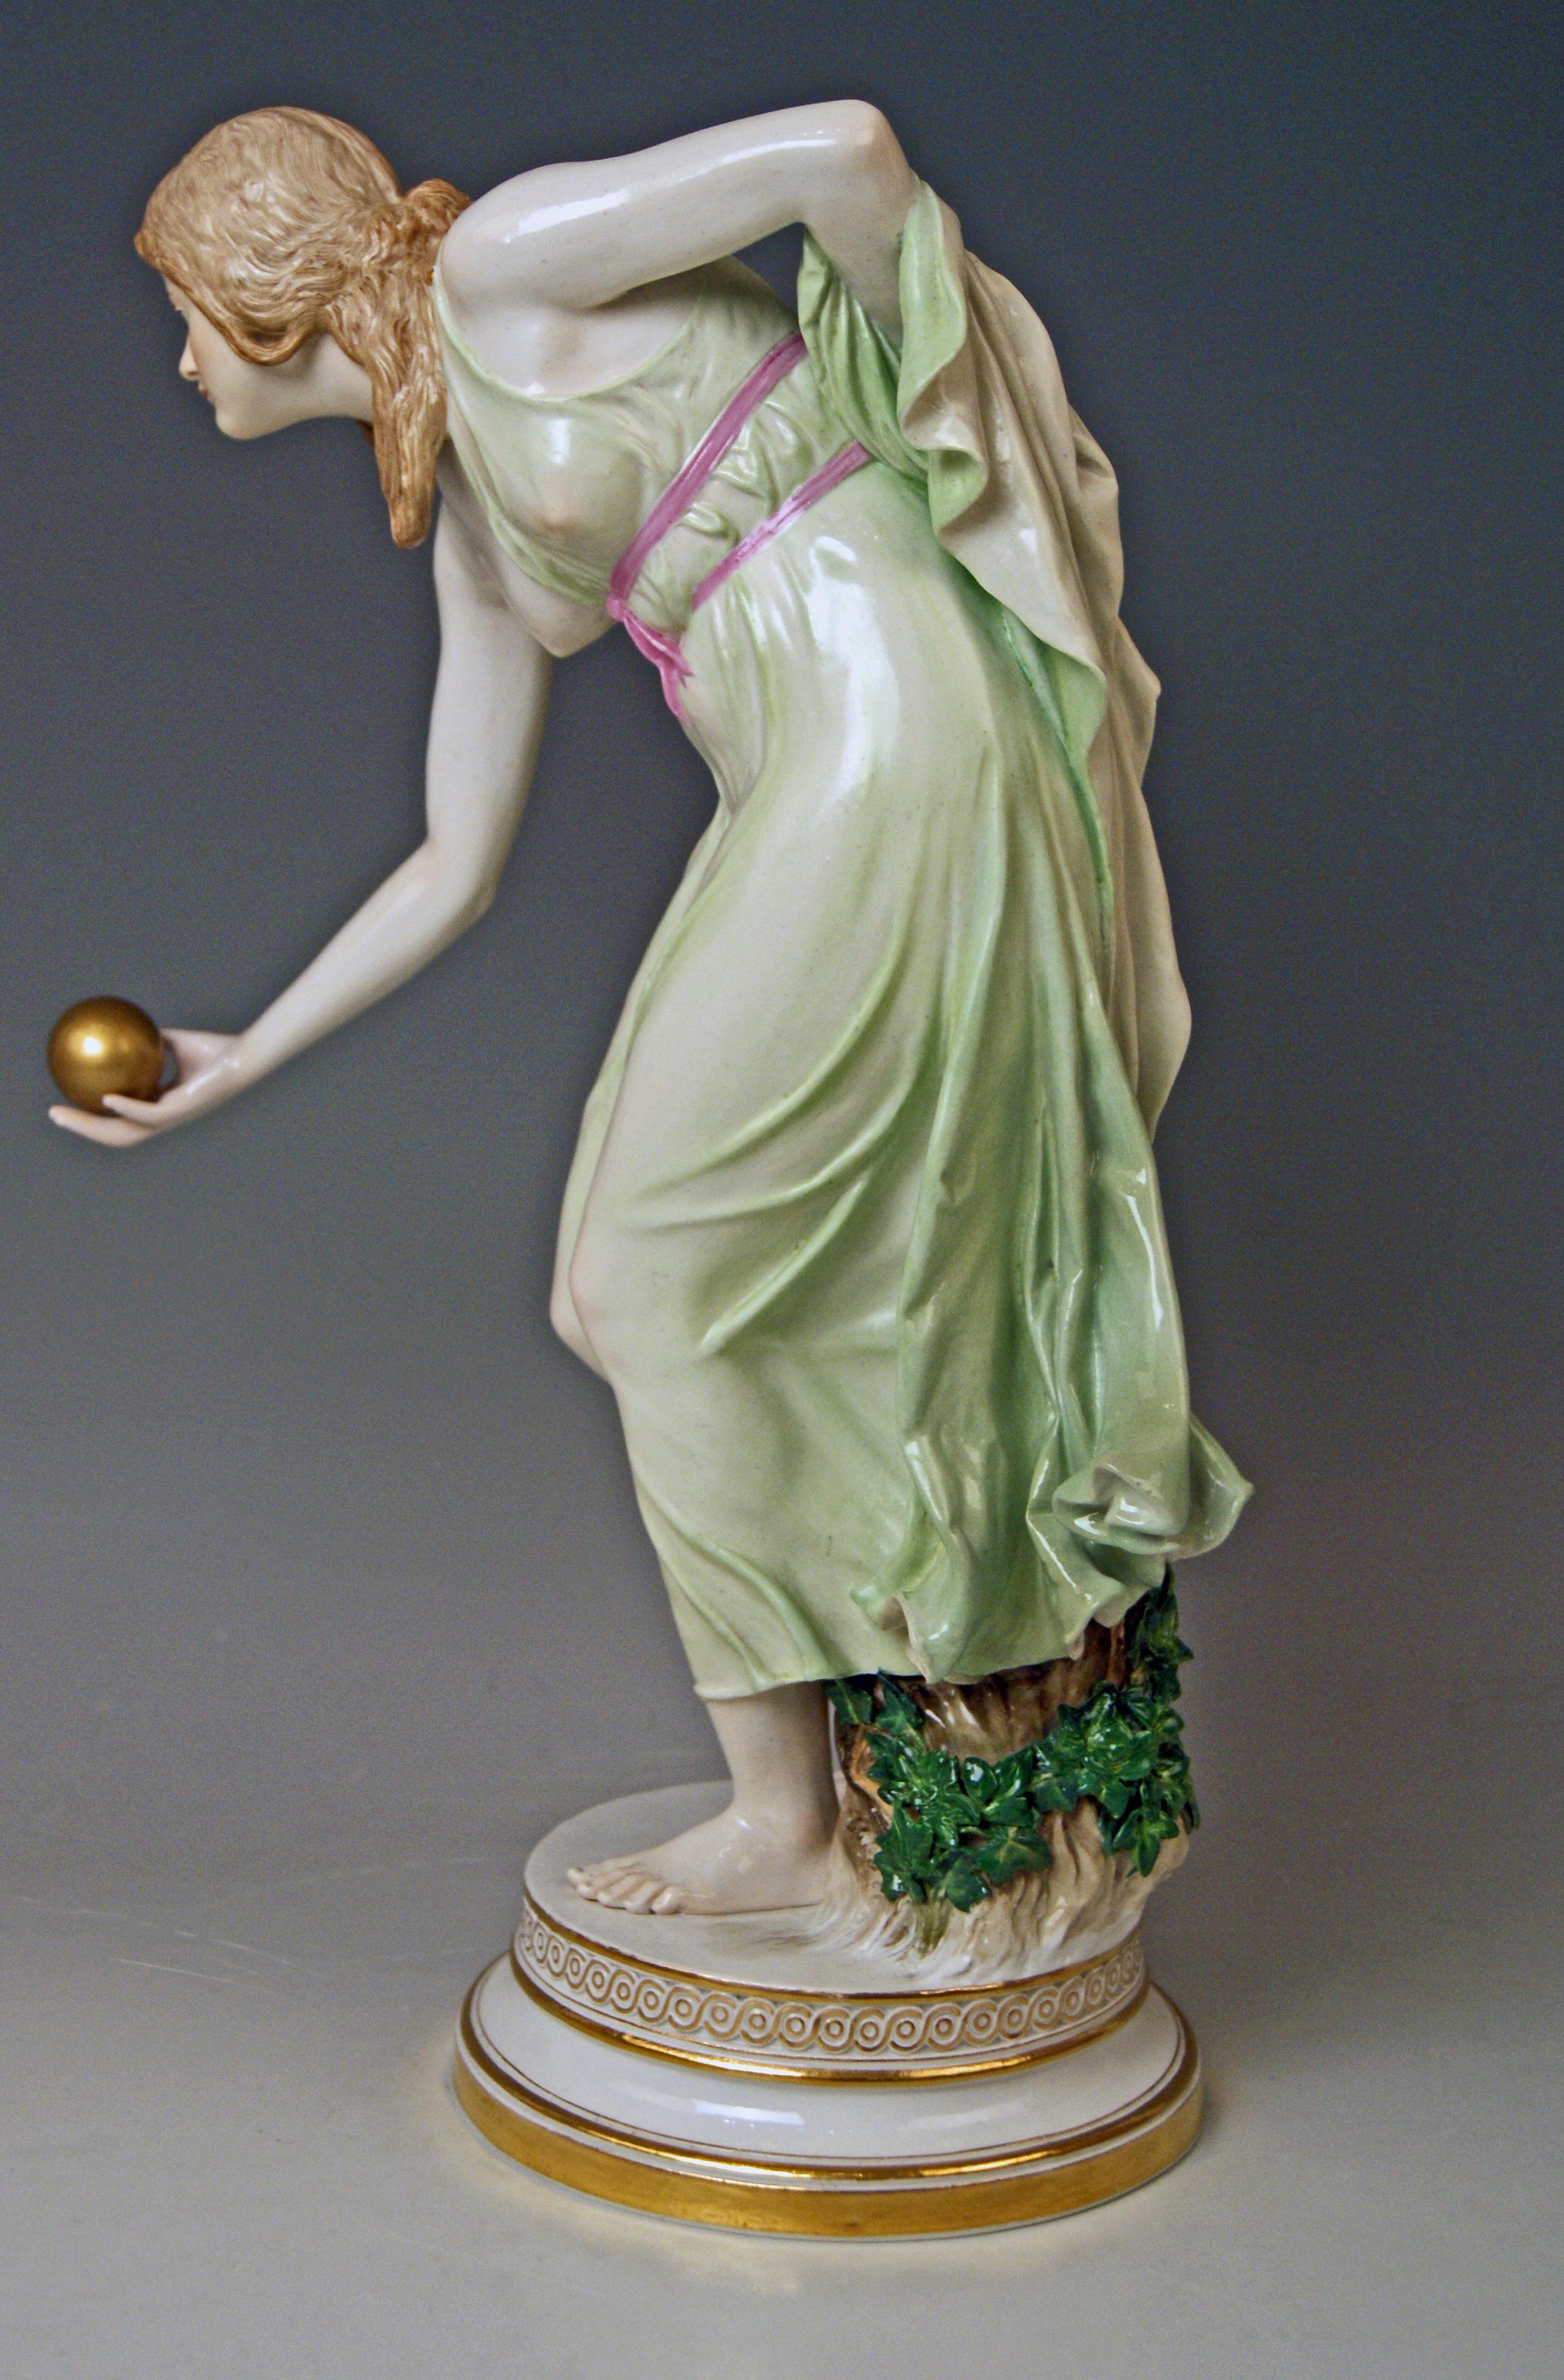 Meissen lovely girl playing bowls
Gorgeous Art Nouveau Porcelain Figurine!
Quite early manufacturing (made circa 1900) 
First quality

Meissen blue sword mark with pommels on hilts (underglazed)
model number Q 180 
painter's number 13

This